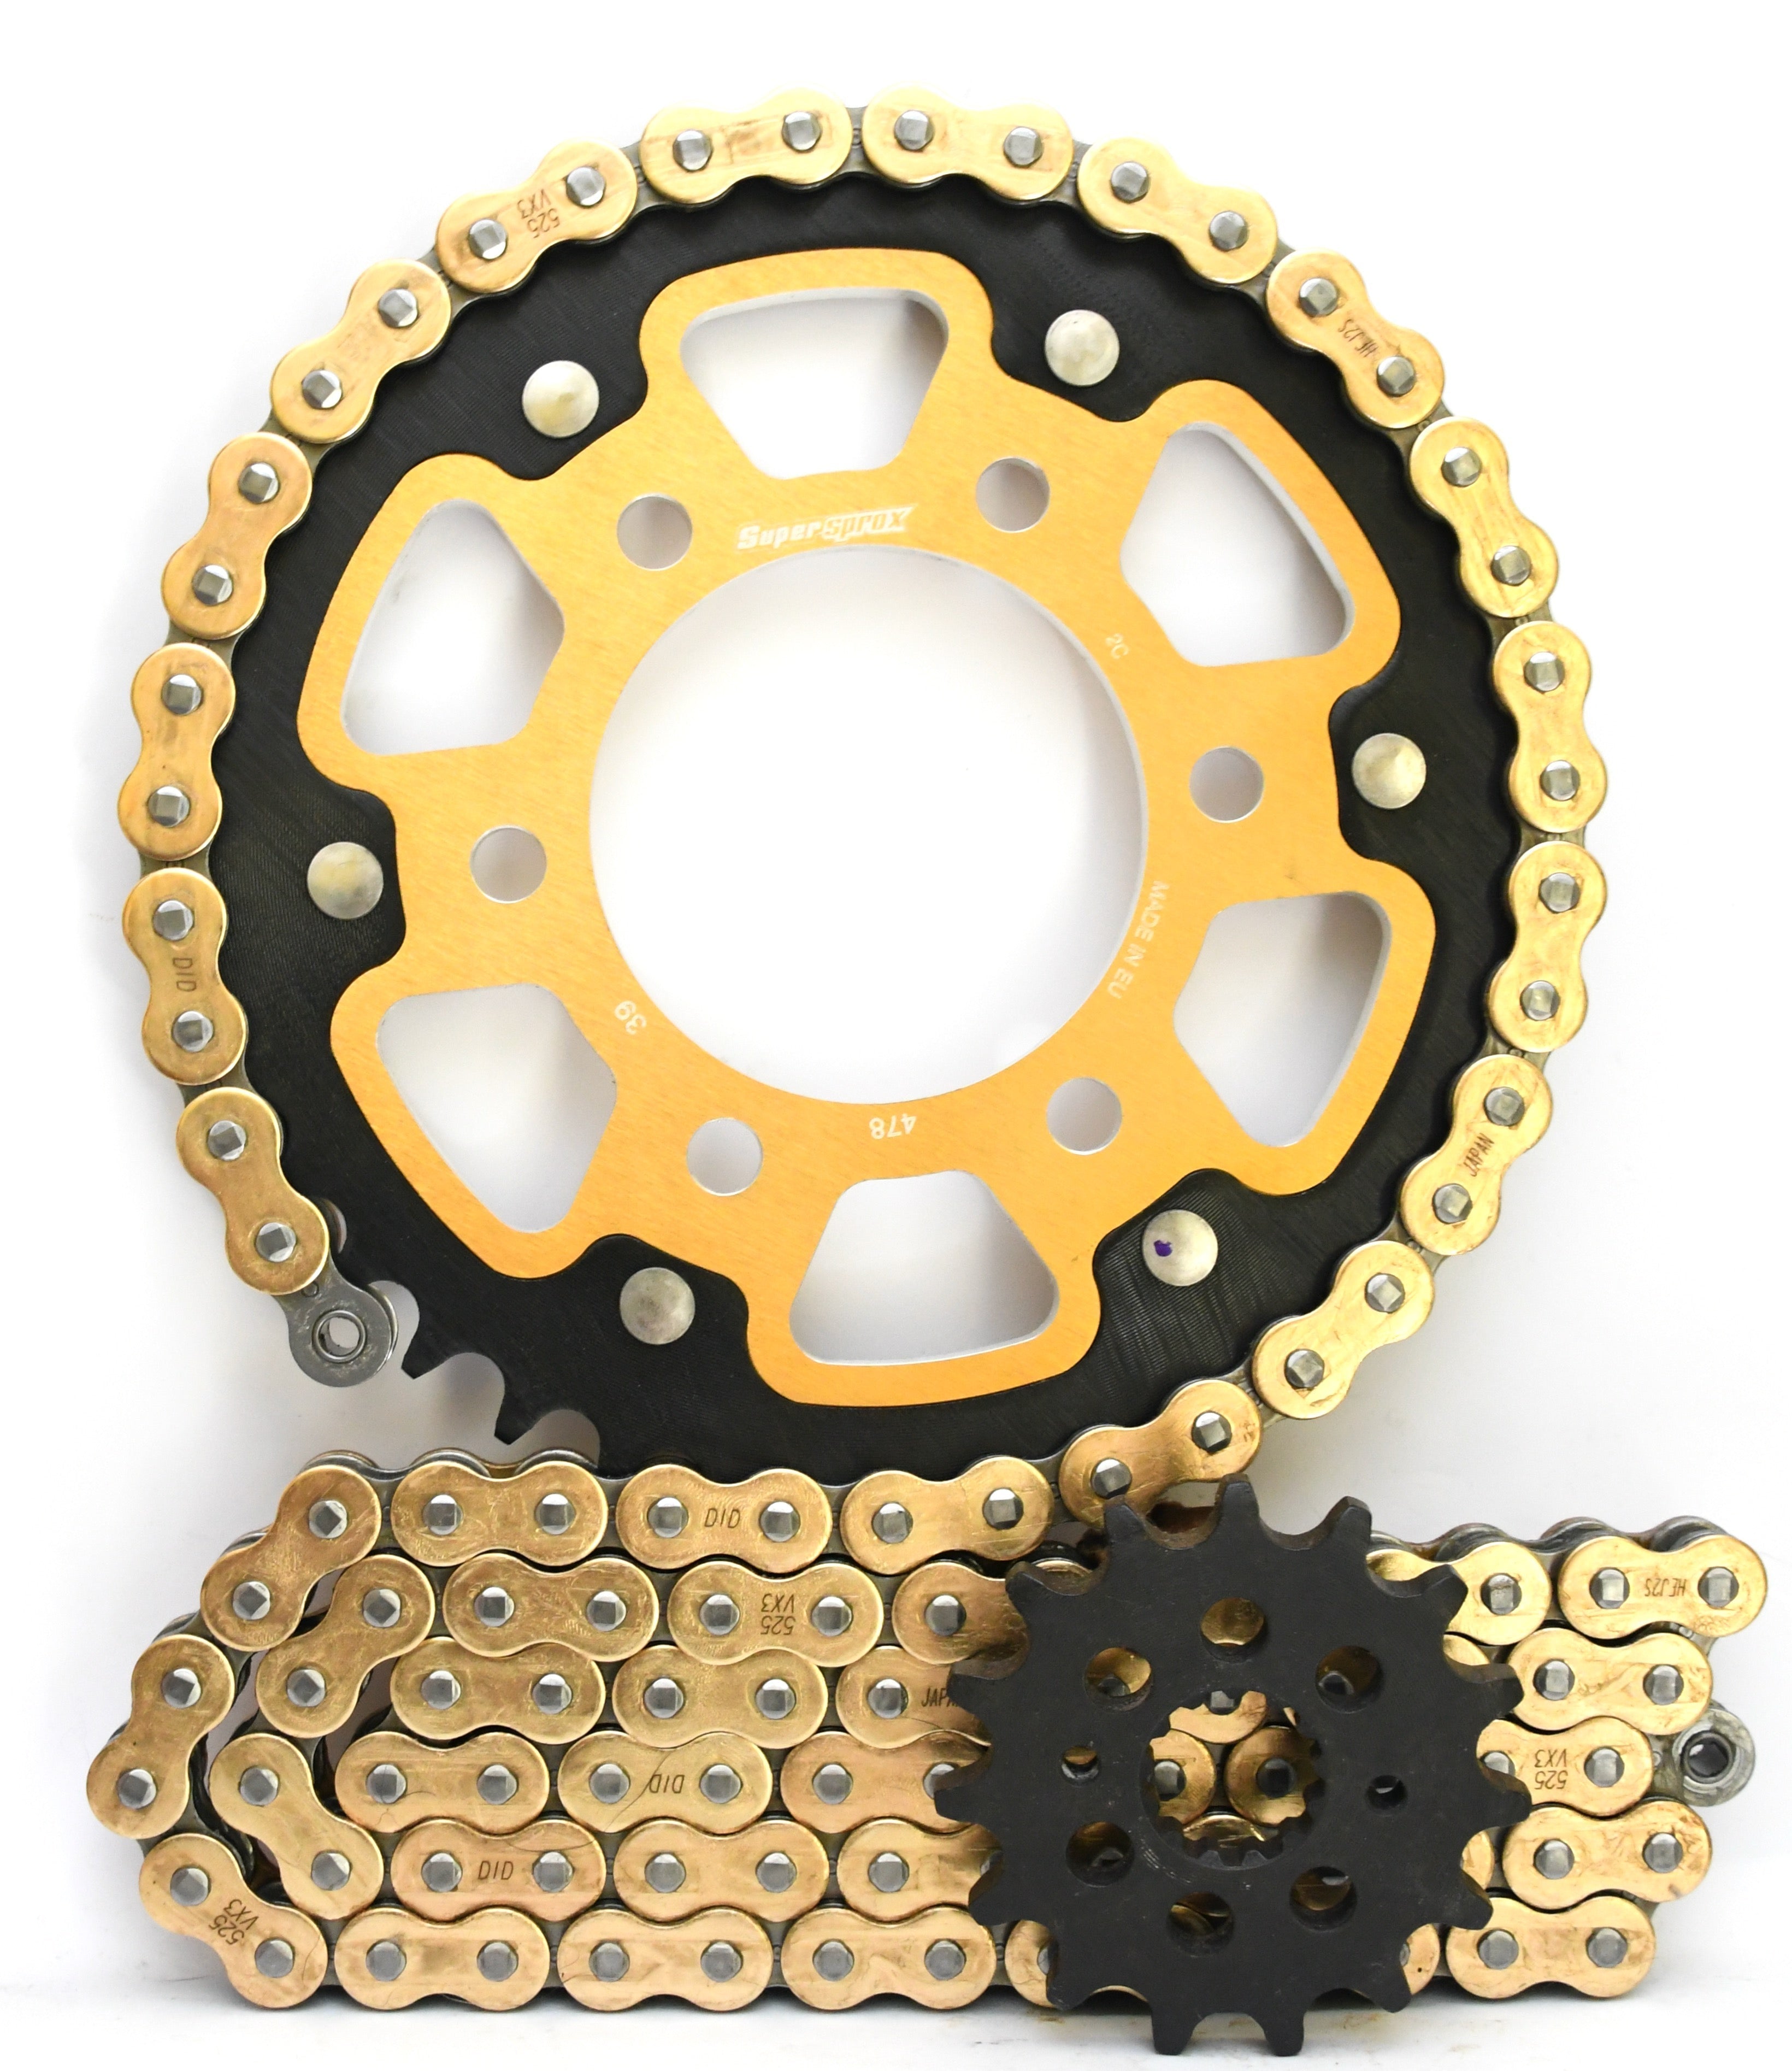 Supersprox Stealth and DID 520 Conversion Chain & Sprocket Kit for Kawasaki ZX-10R 2016-2020 - Standard Gearing